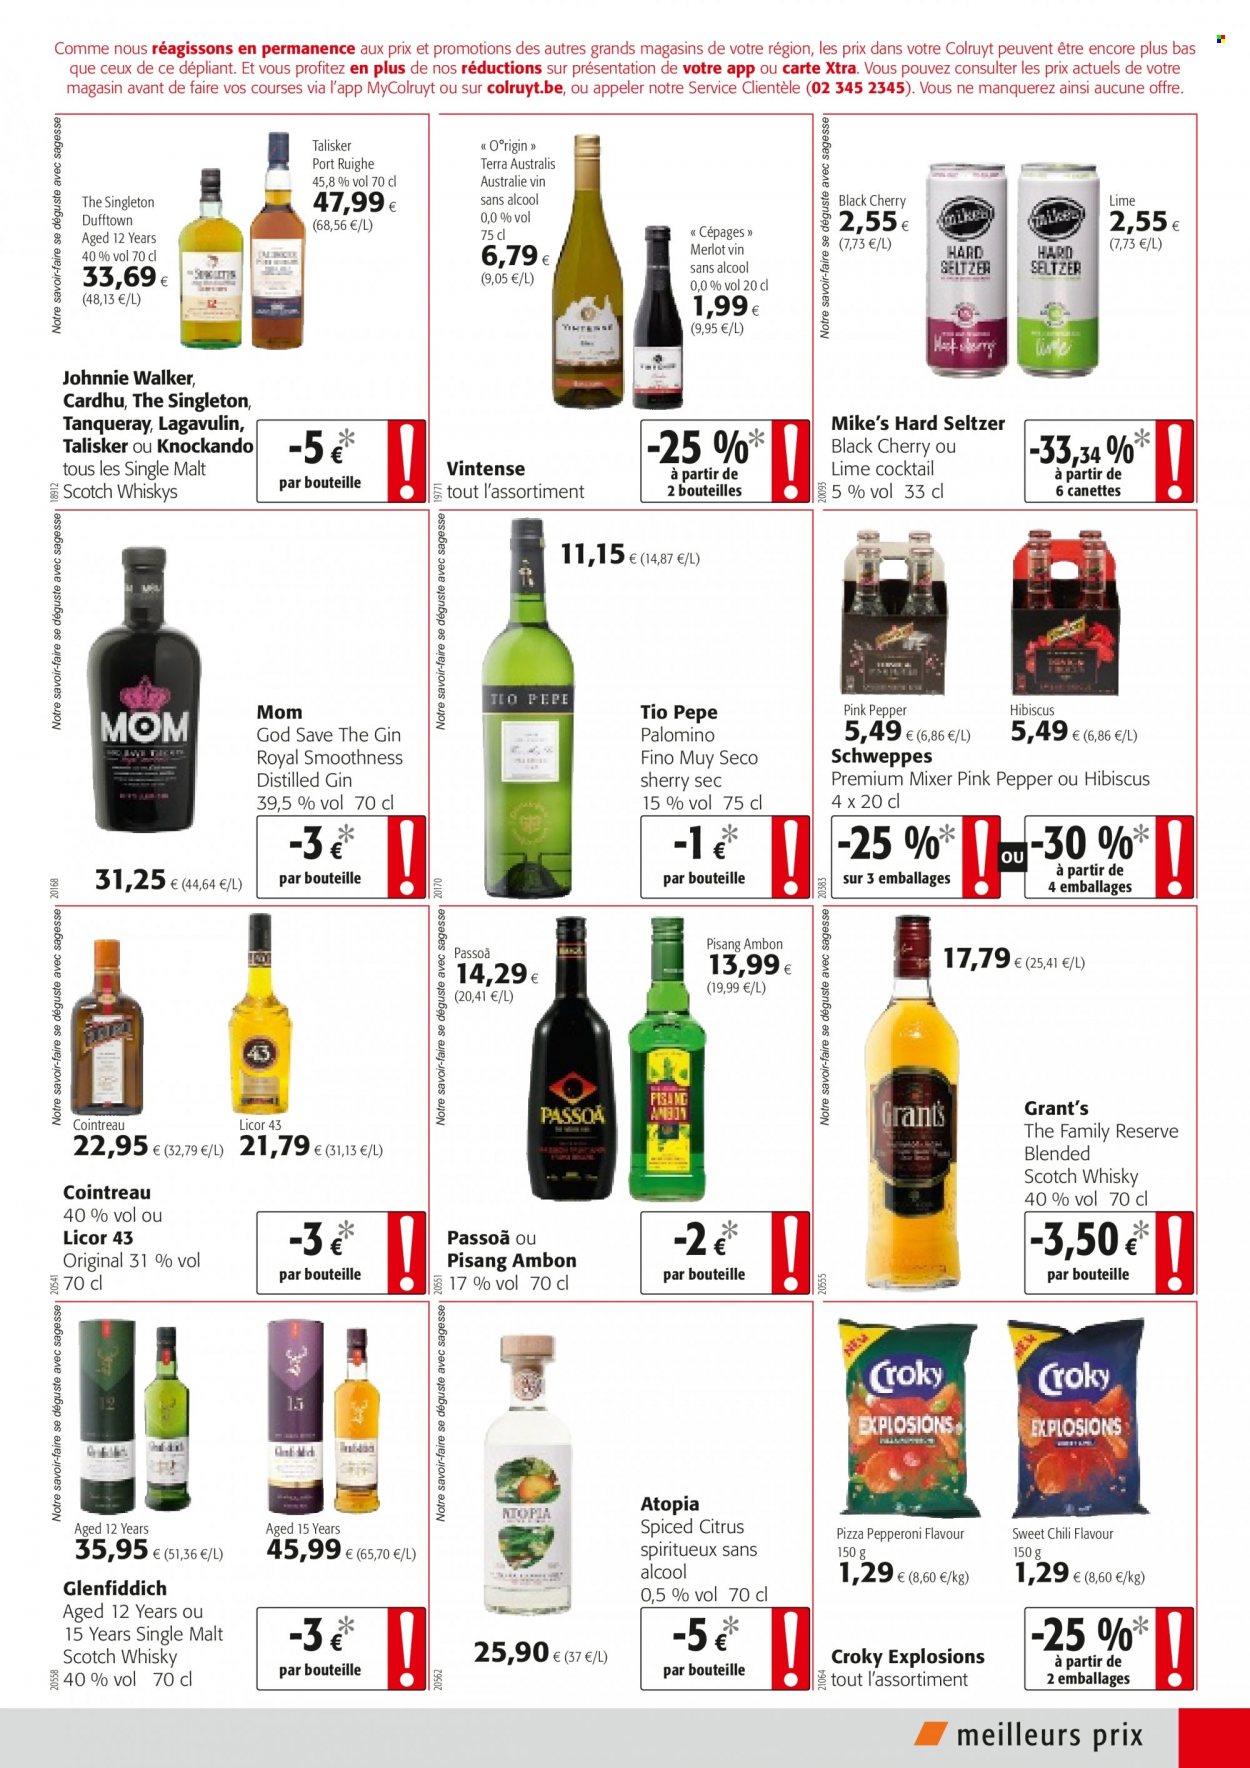 thumbnail - Colruyt-aanbieding - 01/12/2021 - 14/12/2021 -  producten in de aanbieding - pizza, pepperoni, sweet chili sauce, Schweppes, Merlot, blended scotch whisky, scotch whisky, sherry, Single Malt, Grant‘s, Cointreau, whisky, gin. Pagina 3.